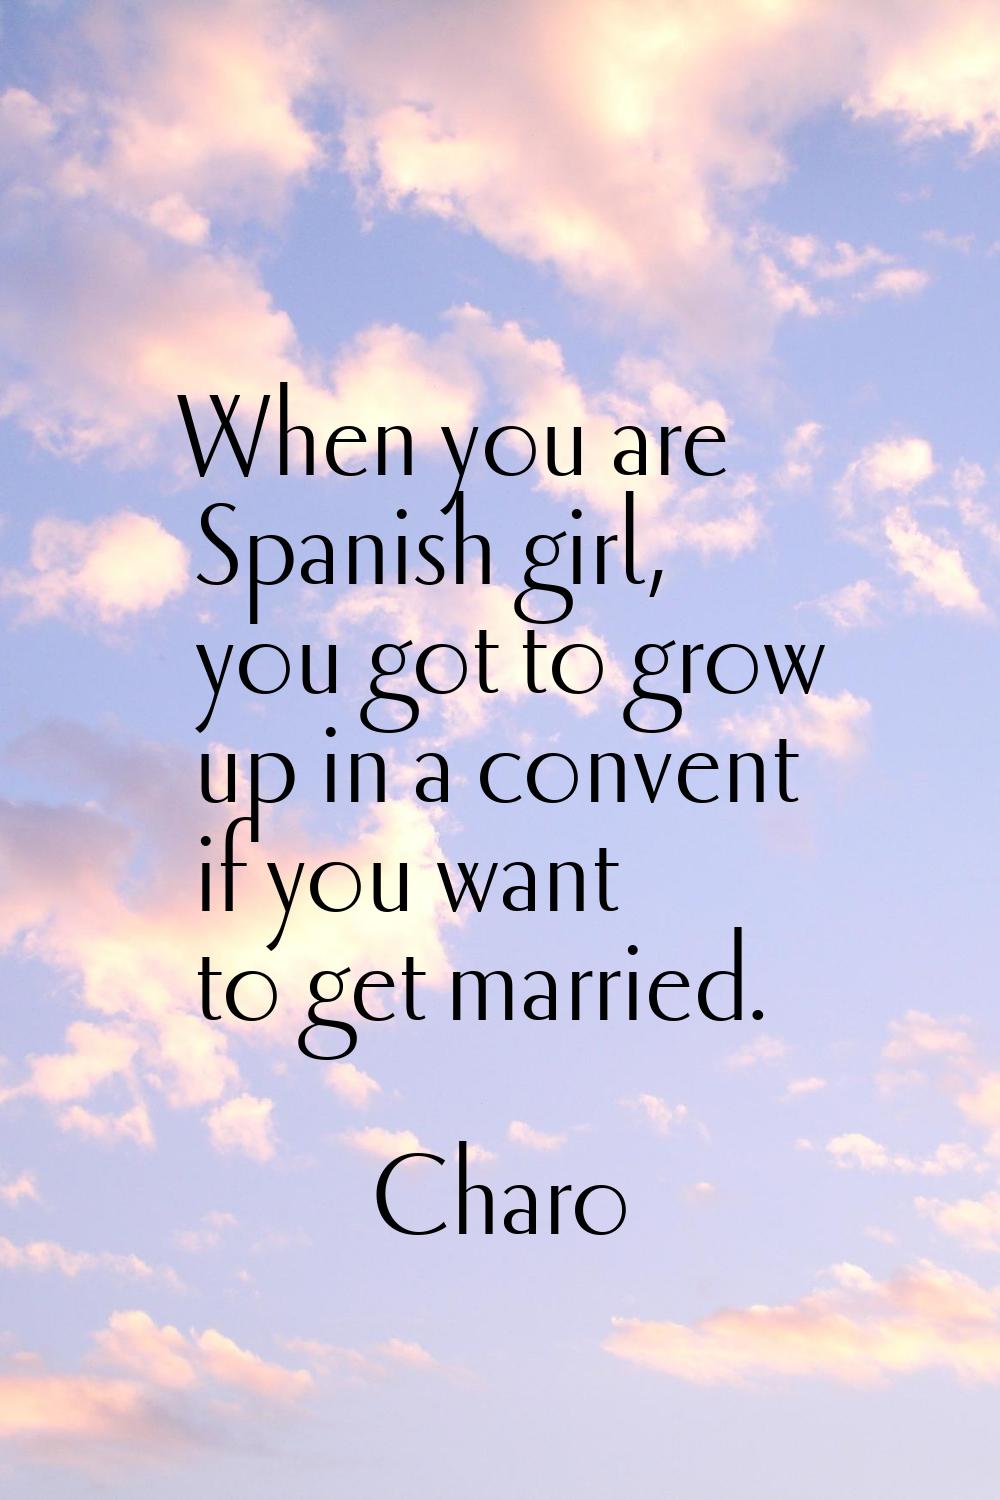 When you are Spanish girl, you got to grow up in a convent if you want to get married.